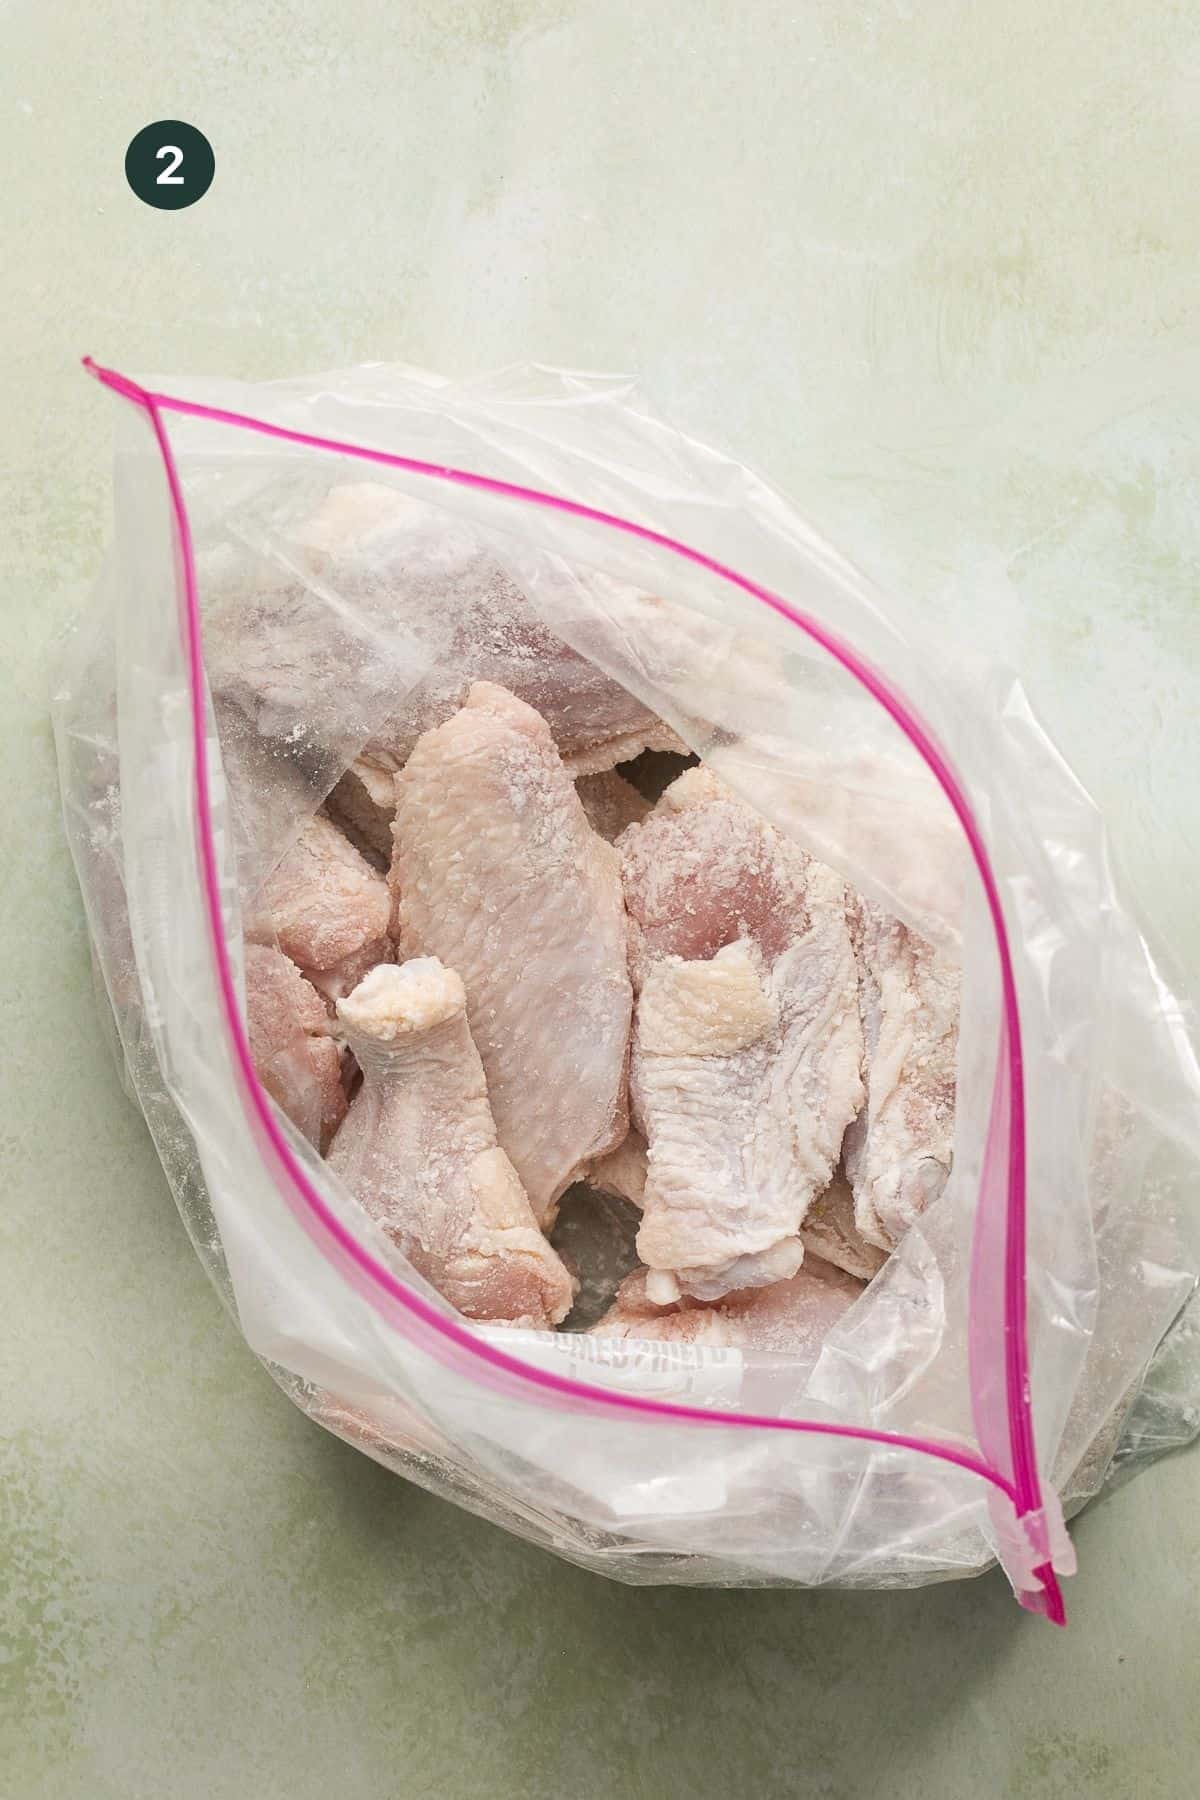 Wings in a ziplock bag coated with baking powder.